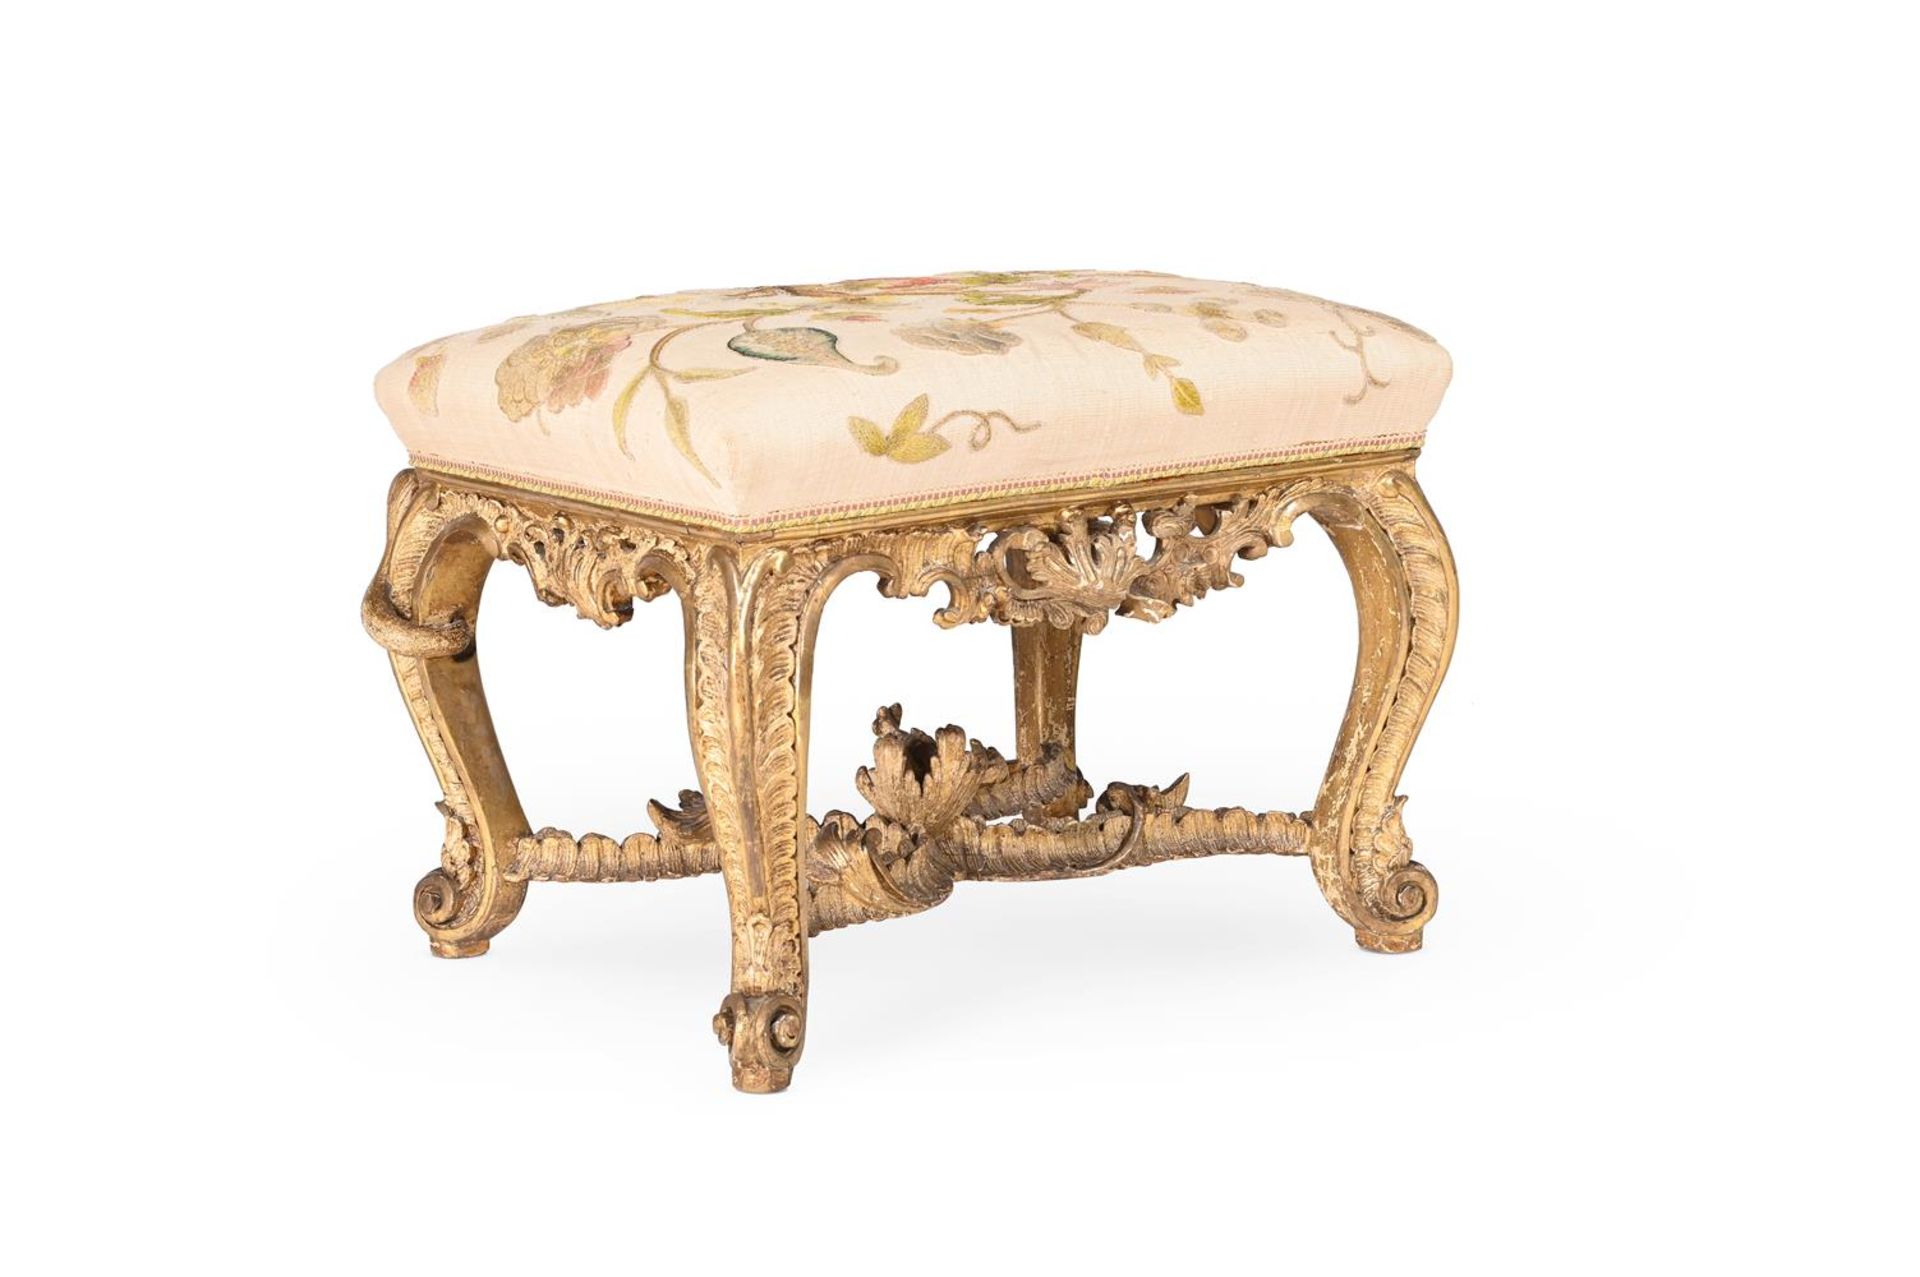 A CARVED GILTWOOD STOOL, PROBABLY GERMAN, IN THE MANNER OF FERDINAND TIETZ, CIRCA 1730 - Image 5 of 8